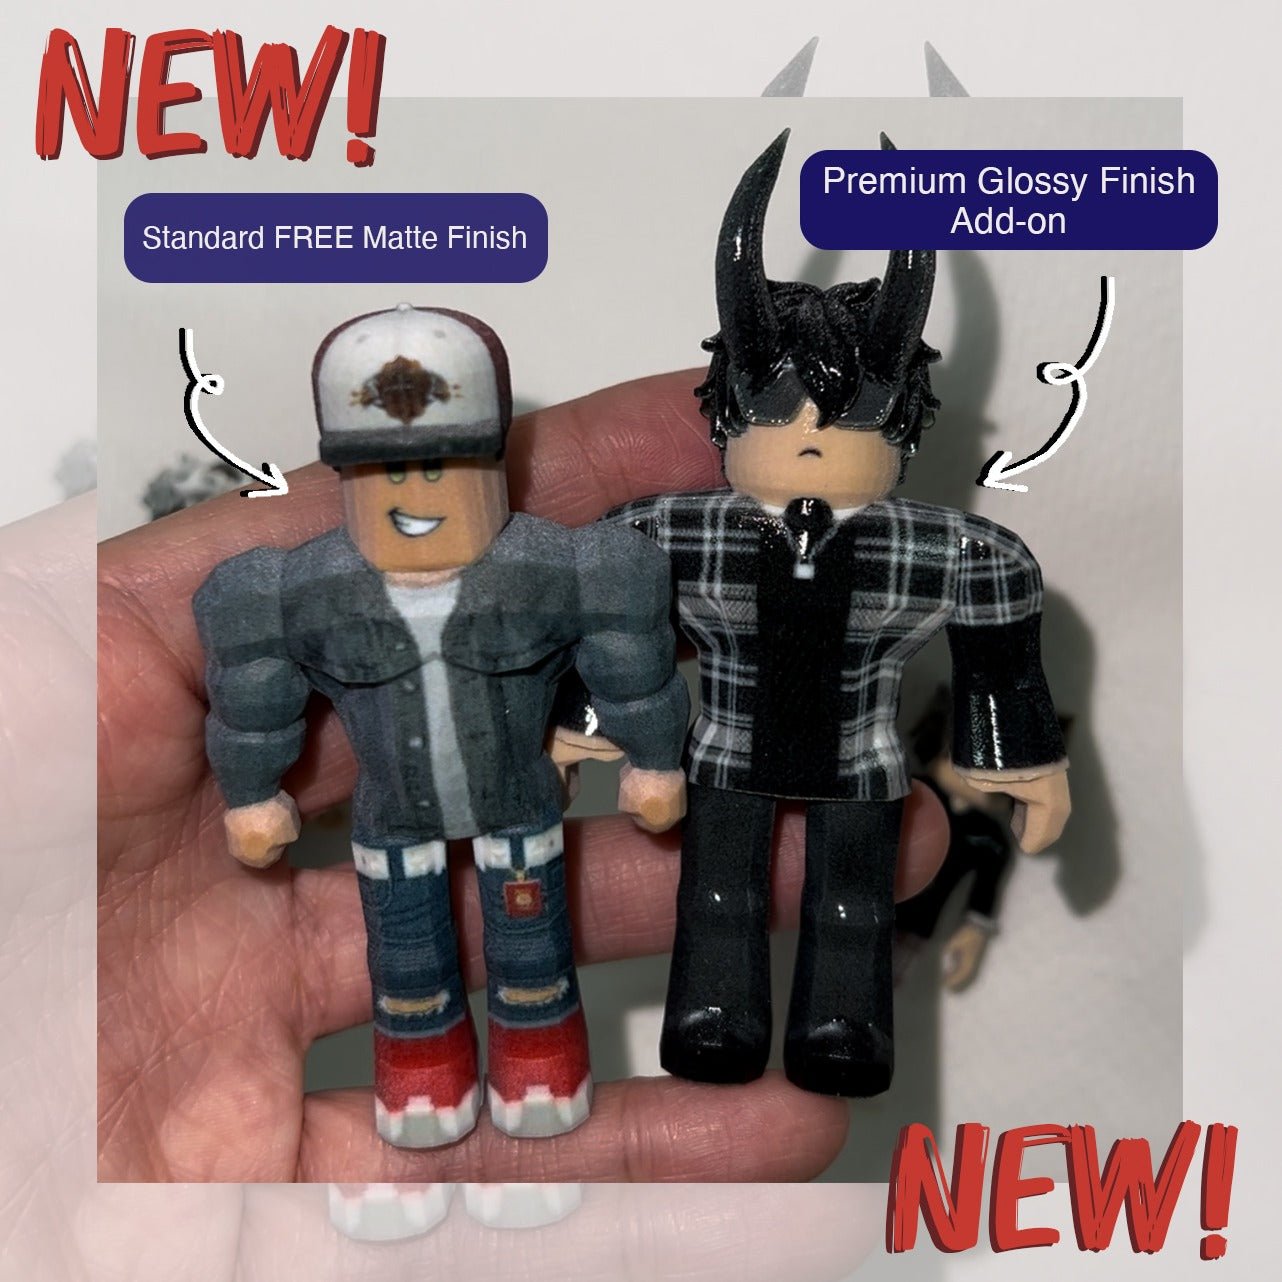 NEW Add-on! Premium Glossy Finish for your Custom Roblox Figurines